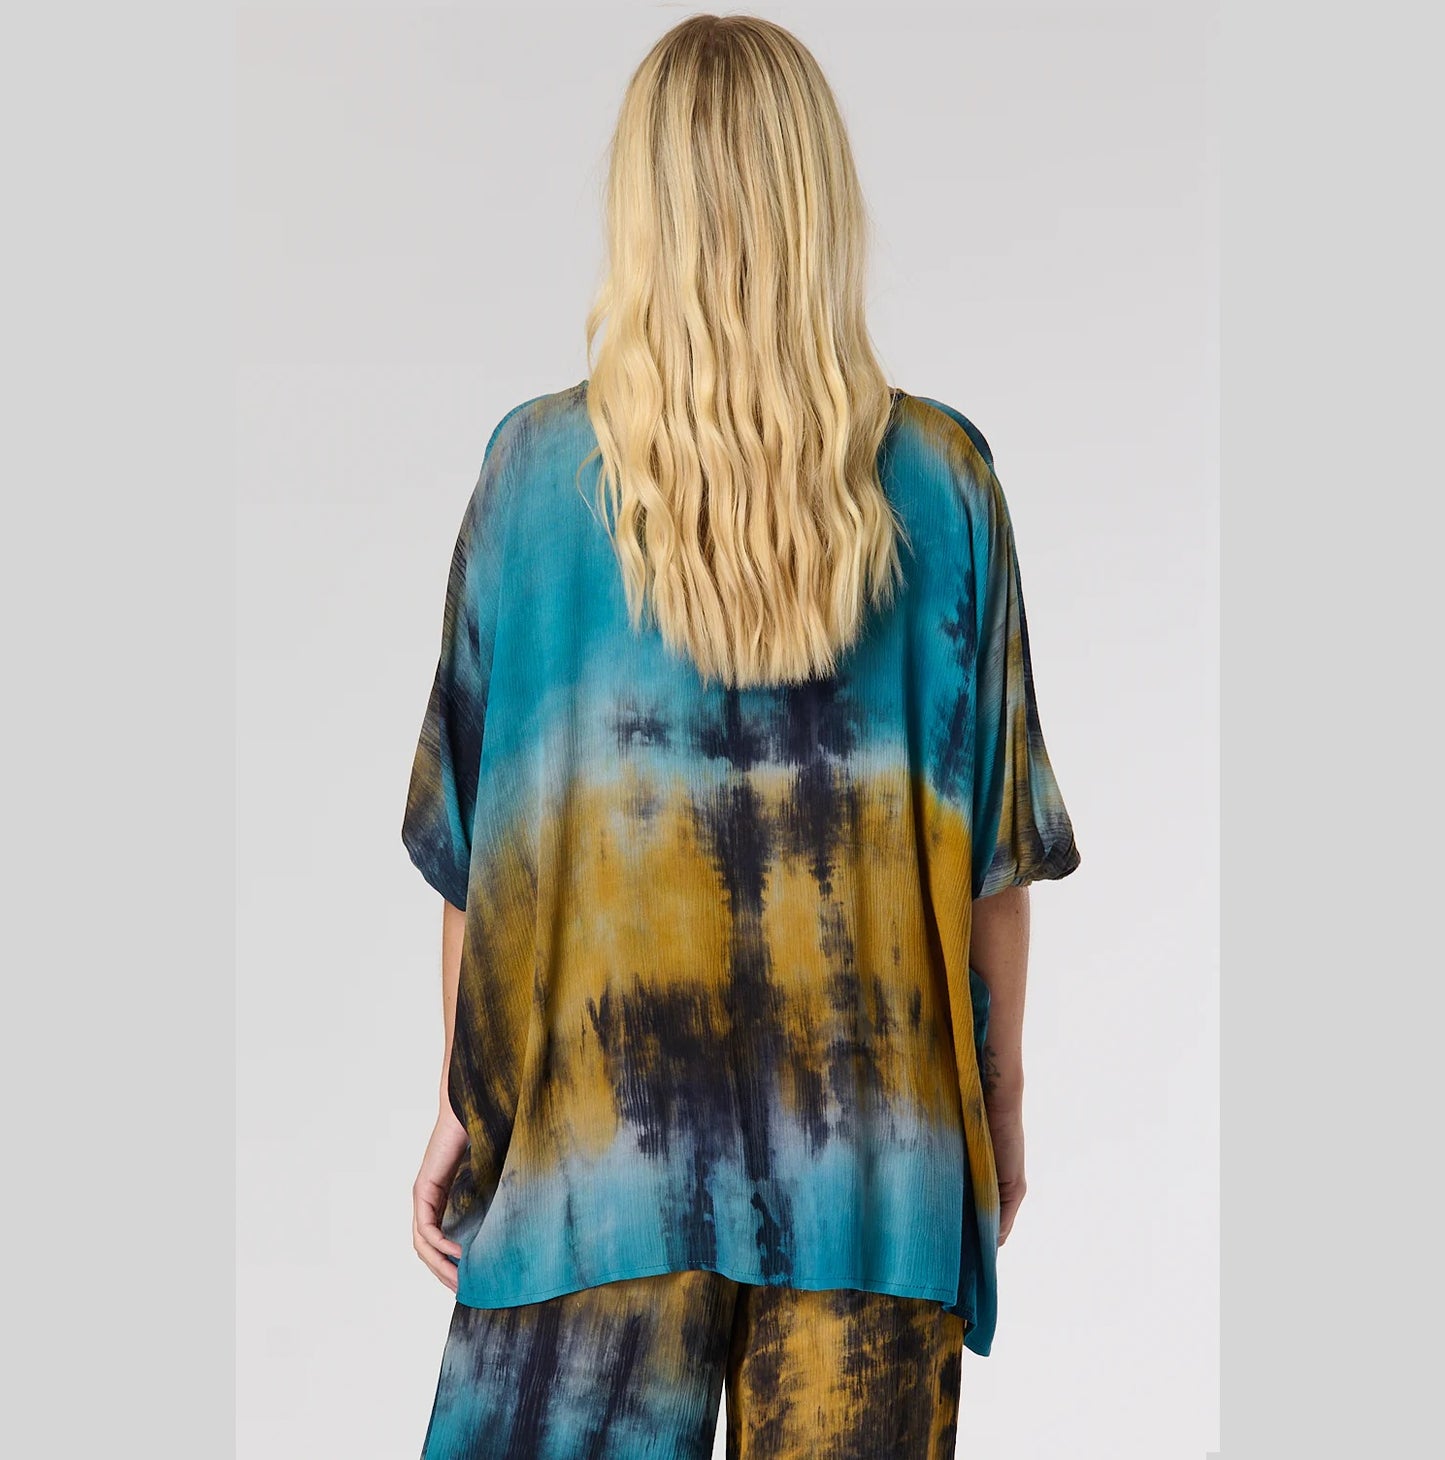 Saloos Teal Tie Dye Top with Necklace